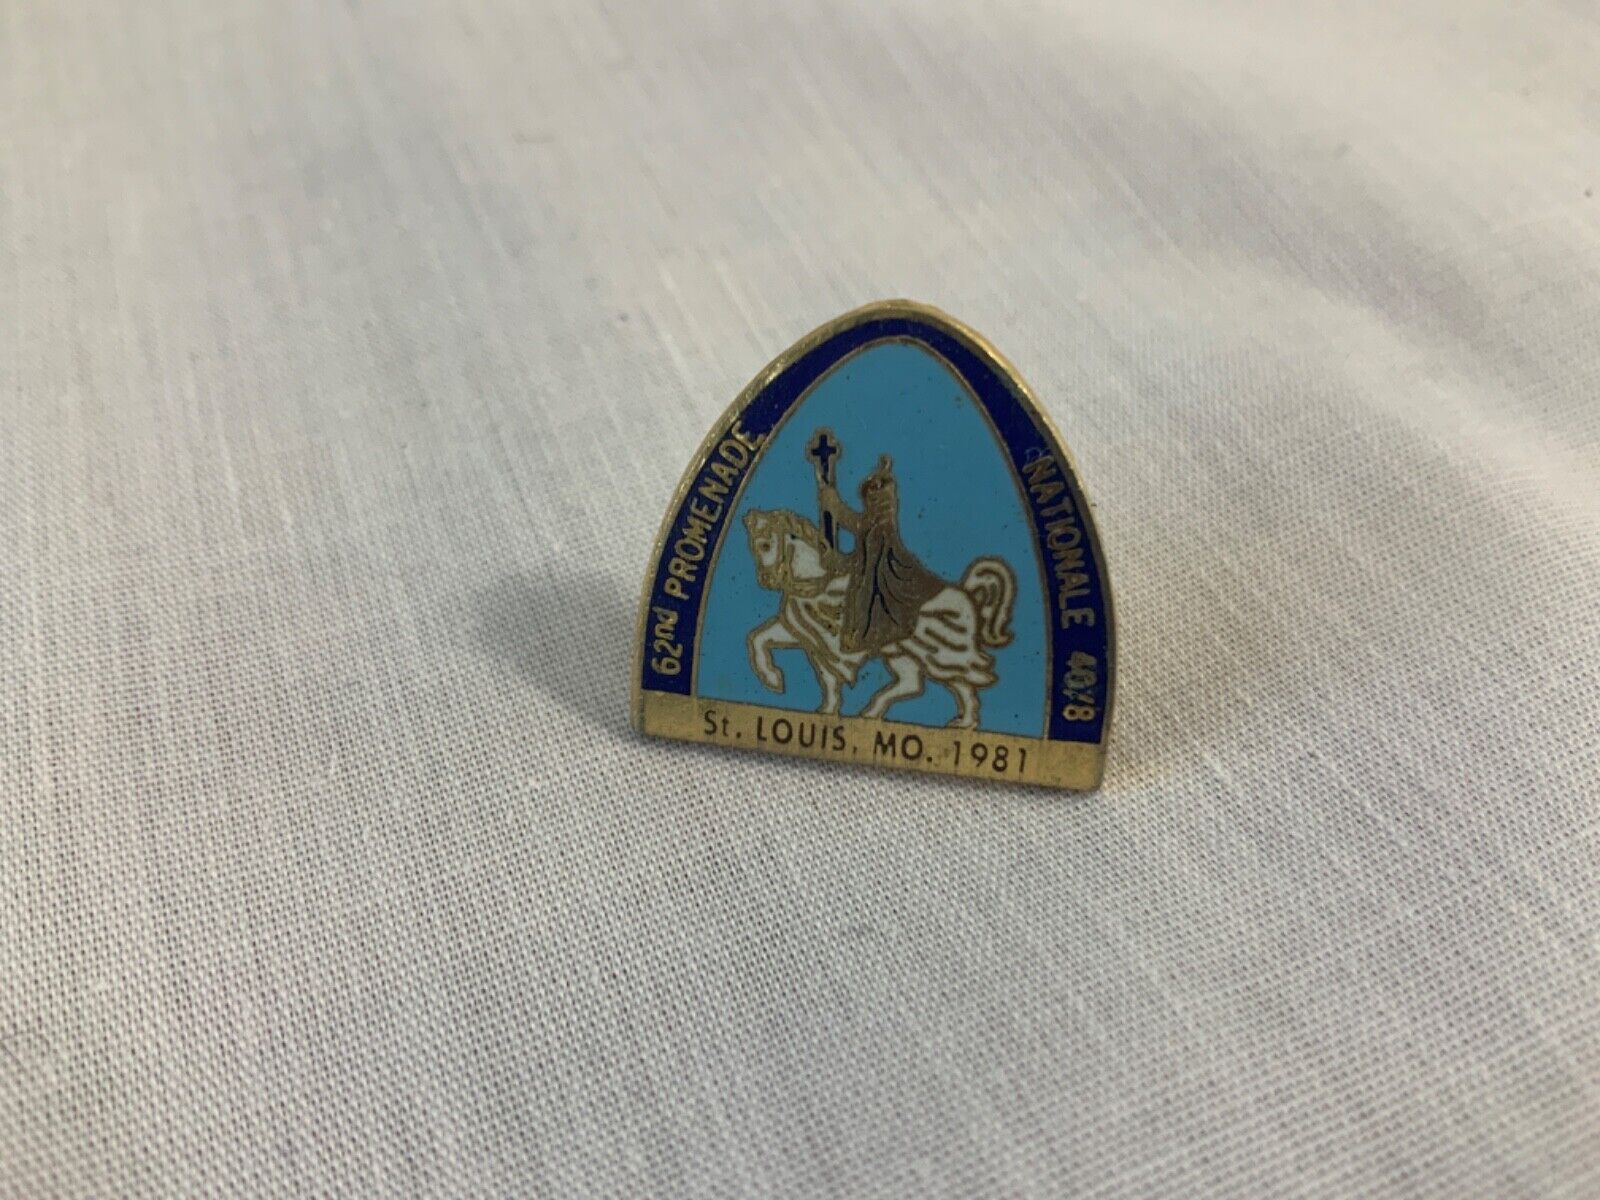 Vintage 40/8 Forty And Eight 62nd Promenade 1981 St Louis Mo Lapel or Hat Pin